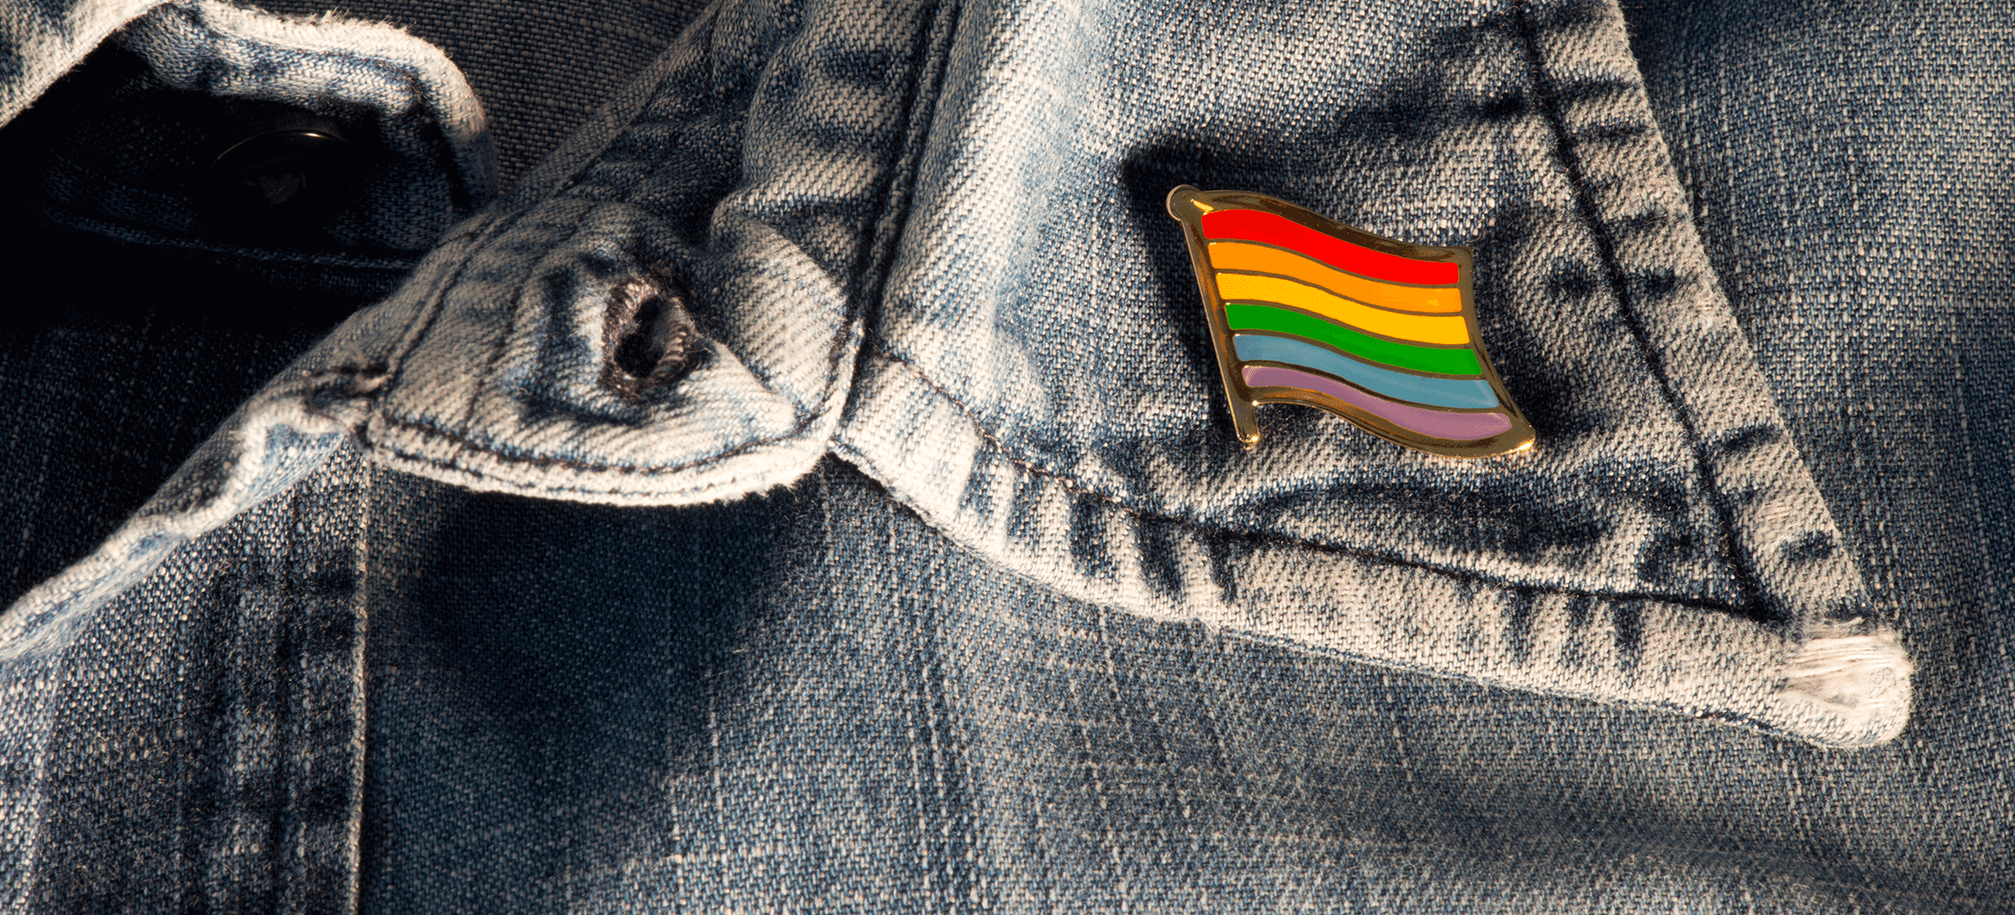 Close up image of a denim jacket with a pride flagged pinned to the collar